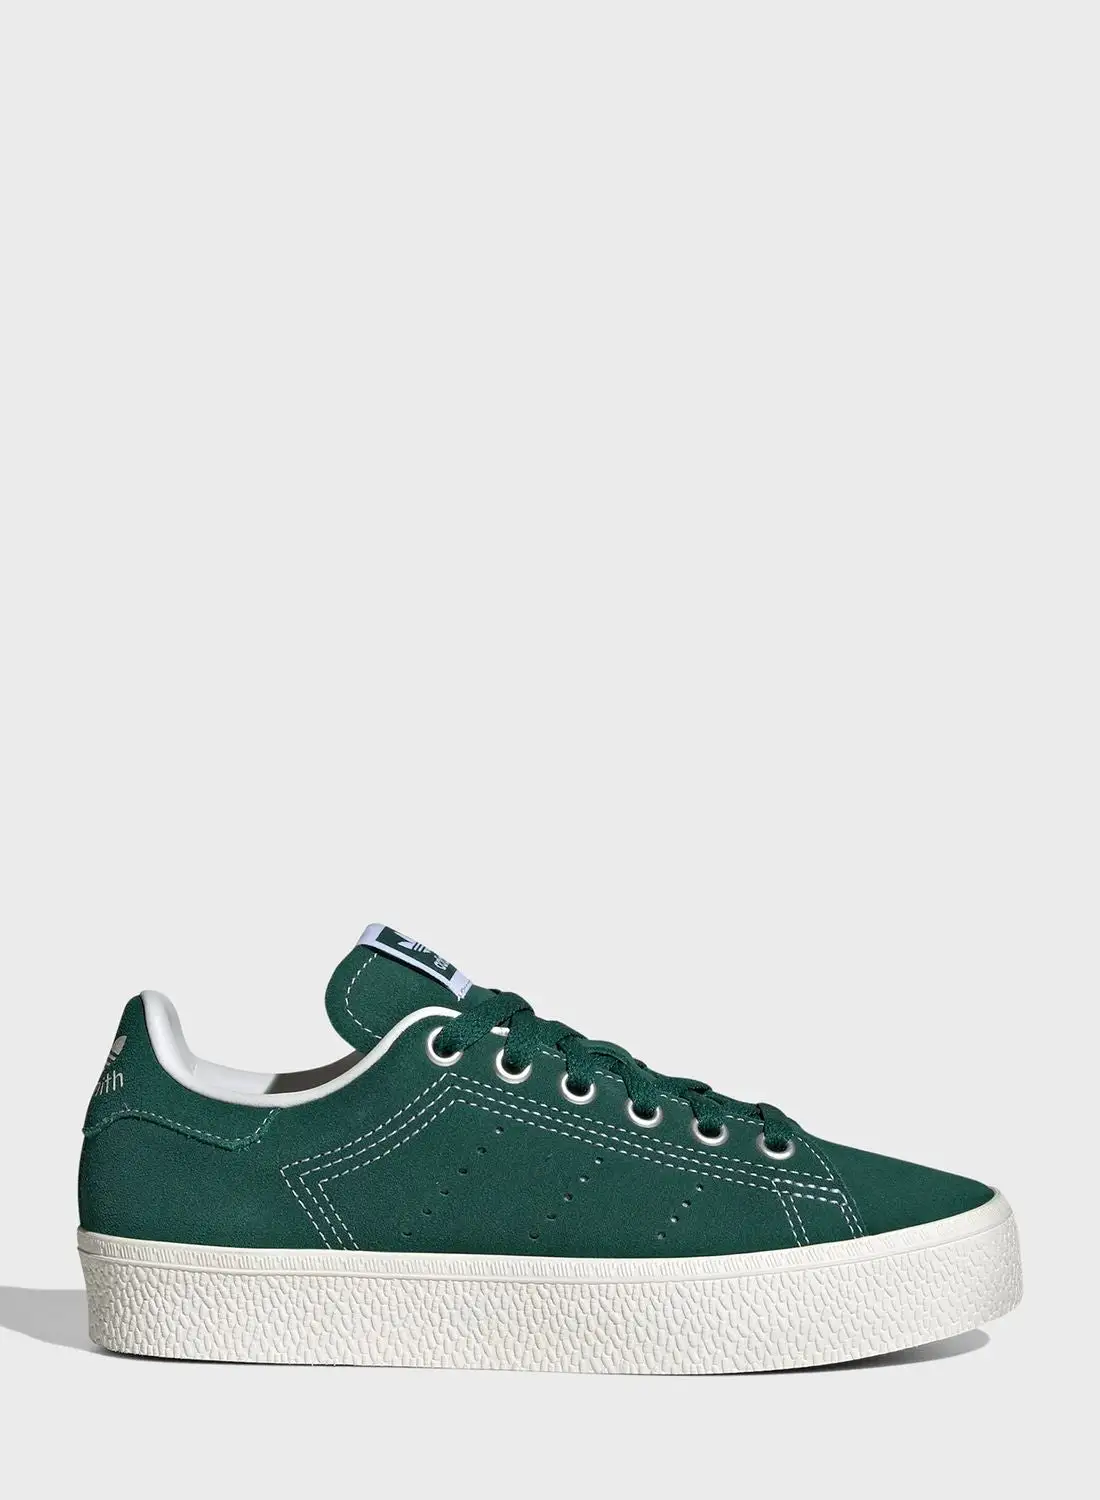 adidas Originals Youth Stan Smith B-Side Shoes